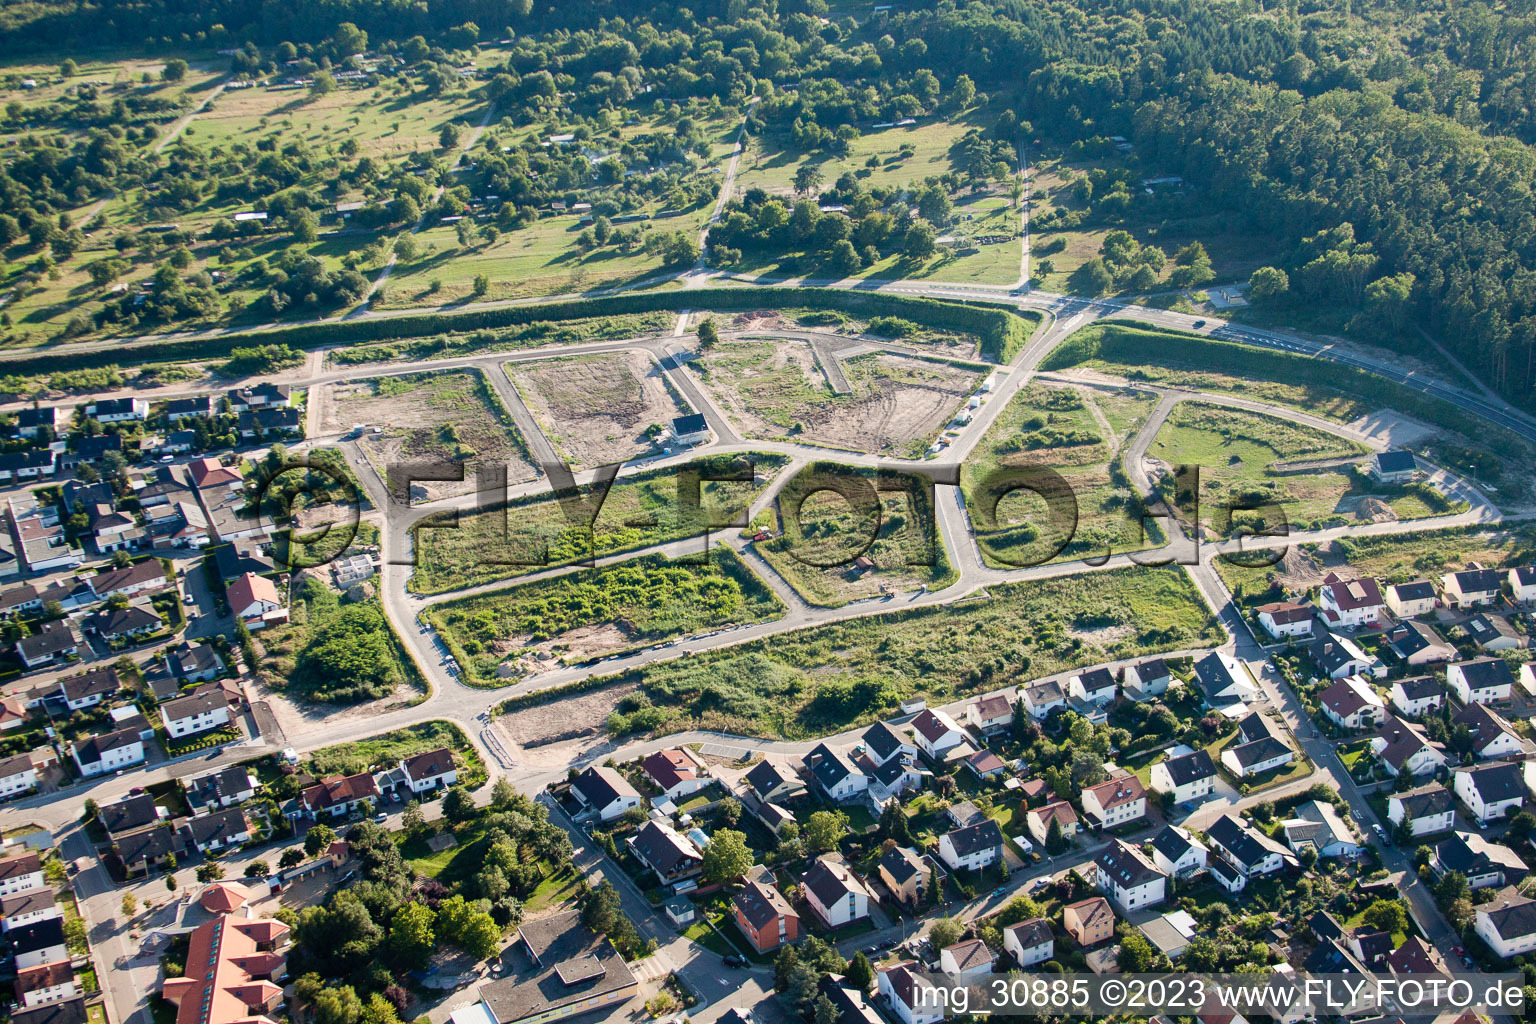 Aerial view of New development area SW in Jockgrim in the state Rhineland-Palatinate, Germany